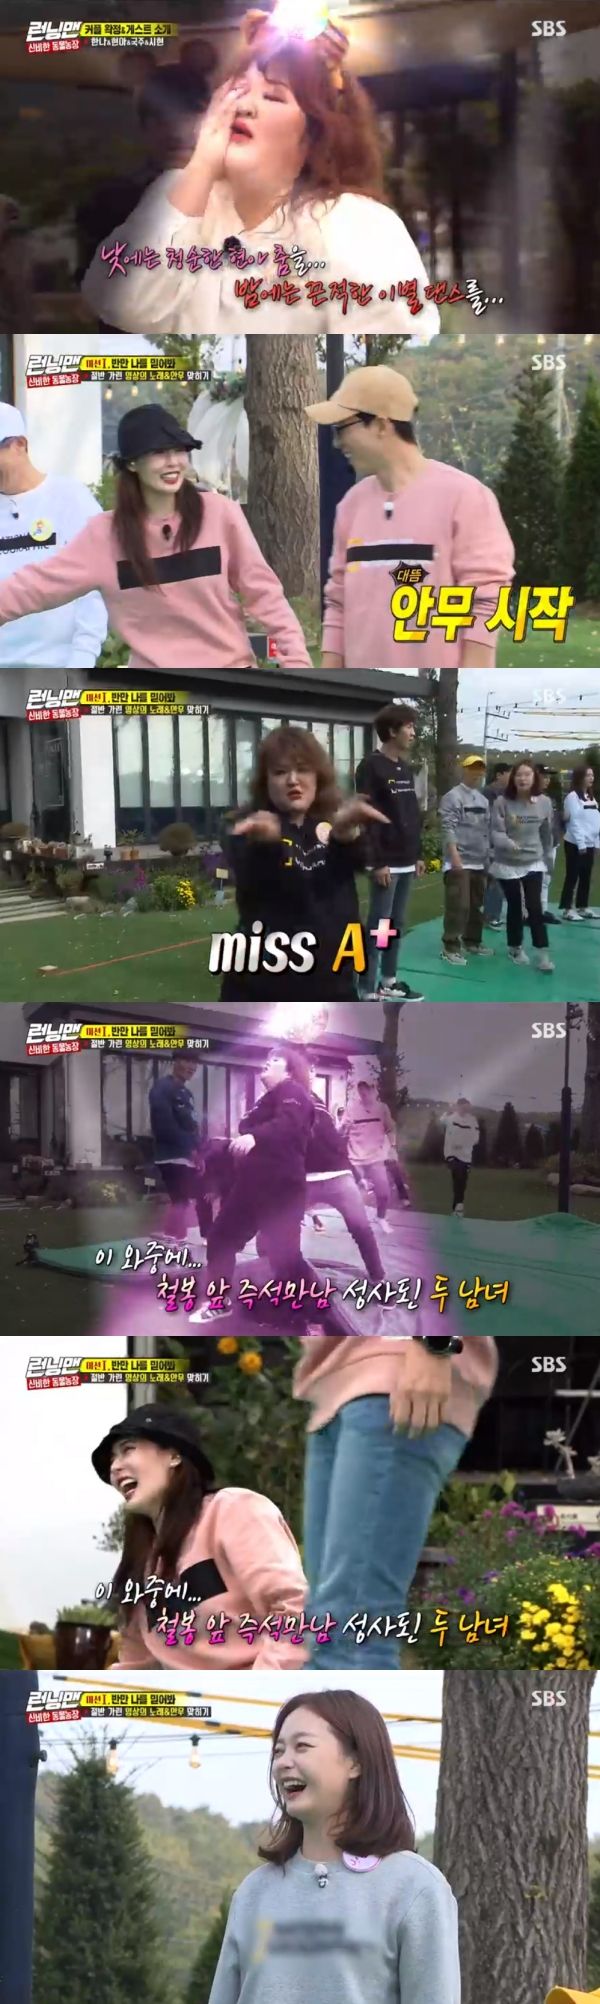 Lee Guk-joo performed a passionate dance.Lee Guk-joo, who appeared as a guest on SBS Running Man broadcasted on the 10th, participated in the animal couple race with Hyona, Kang Han-Na and showed off the outdoor dance.On this day, Lee Guk-joo X Hyona X Kang Han-Na introduced himself with a voice that was modulated with tigers, pigs and foxes, respectively.The three who appeared afterwards were greeted with a furious reception by members: Kang Han-Na said: Its been a year, I wanted to come so much, I play and relax a lot at home.I was so lying that I bought a cervical pillow. Hyuna also greeted me and showed Lee Guk-joo and new song choreography.Lee Guk-joo showed a passionate dance performance, saying, Red Yo is more than Mr. Hyuna.Lee Guk-joo also choreographed the song Choice with Video Songs during the race, according to Uhm Jung Hwa and Miss Ai.With the Hyuna - Yoo Jae-Suk team and the Jeon So-min - Haha team having a dance showdown, Lee Guk-joo laughed with the out-of-the-box dance.Lee Guk-joo, leaning against the pillar, performed a passionate dance, and Lee Kwang-soo also helped; the members calmed down the two narcissists and laughed.After the song ended, Yoo Jae-Suk added, I thought it was a national flag, I fell here and was undertaker, while Lee Guk-joo said, Ive never seen him.Haha mimicked the undertaker, saying, Its similar, it was very popular, and Lee Guk-joo followed the gestures and eyes.Without bowing to this, Lee Guk-joo laughed with his over-the-counter dance every time the music flowed.Lee Guk-joo also showed Lee Kwang-soo and couple dance, who teamed up with the restraining members, saying, We have been interested in us since.